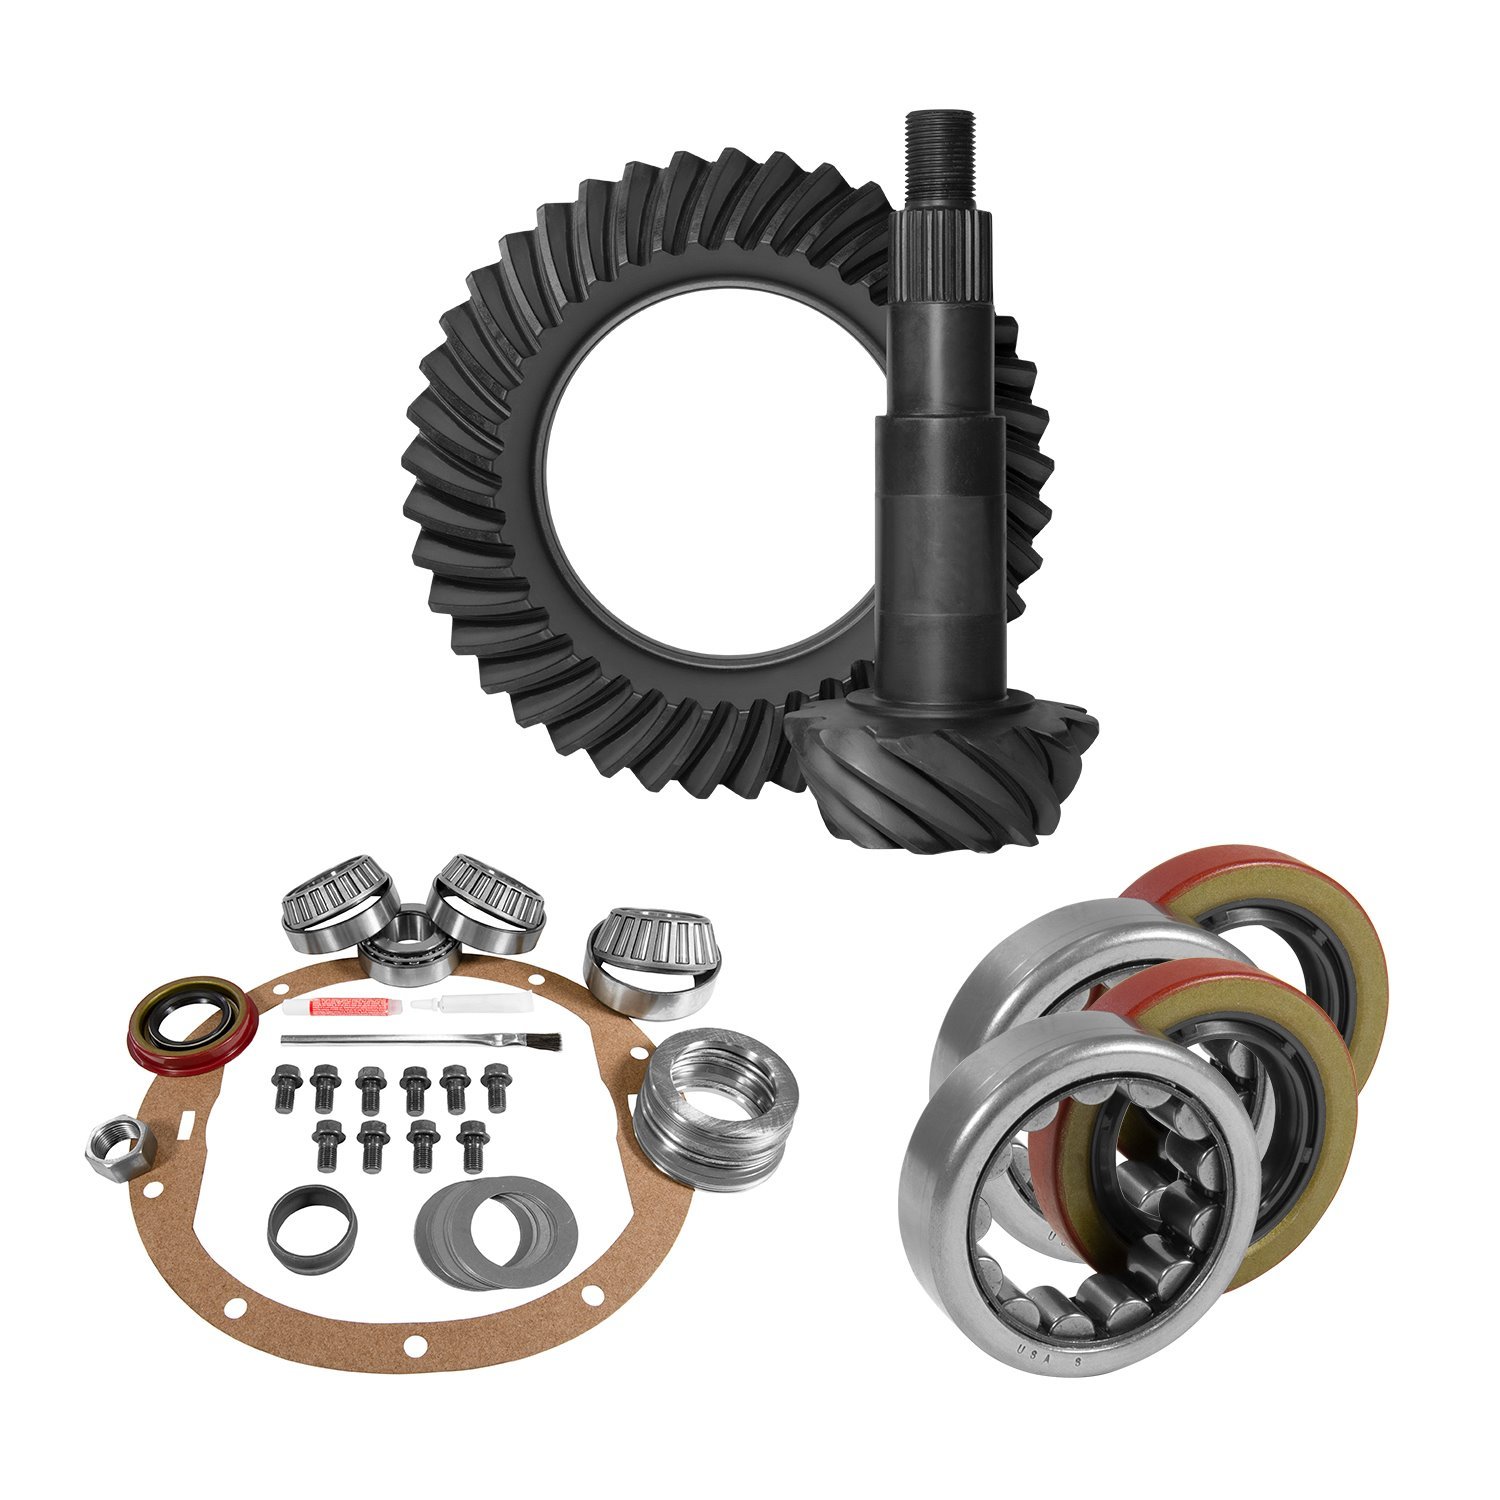 USA Standard 10666 8.2 in. GM 3.73 Rear Ring & Pinion Install Kit, 2.25 in. Od Axle Bearings & Seals